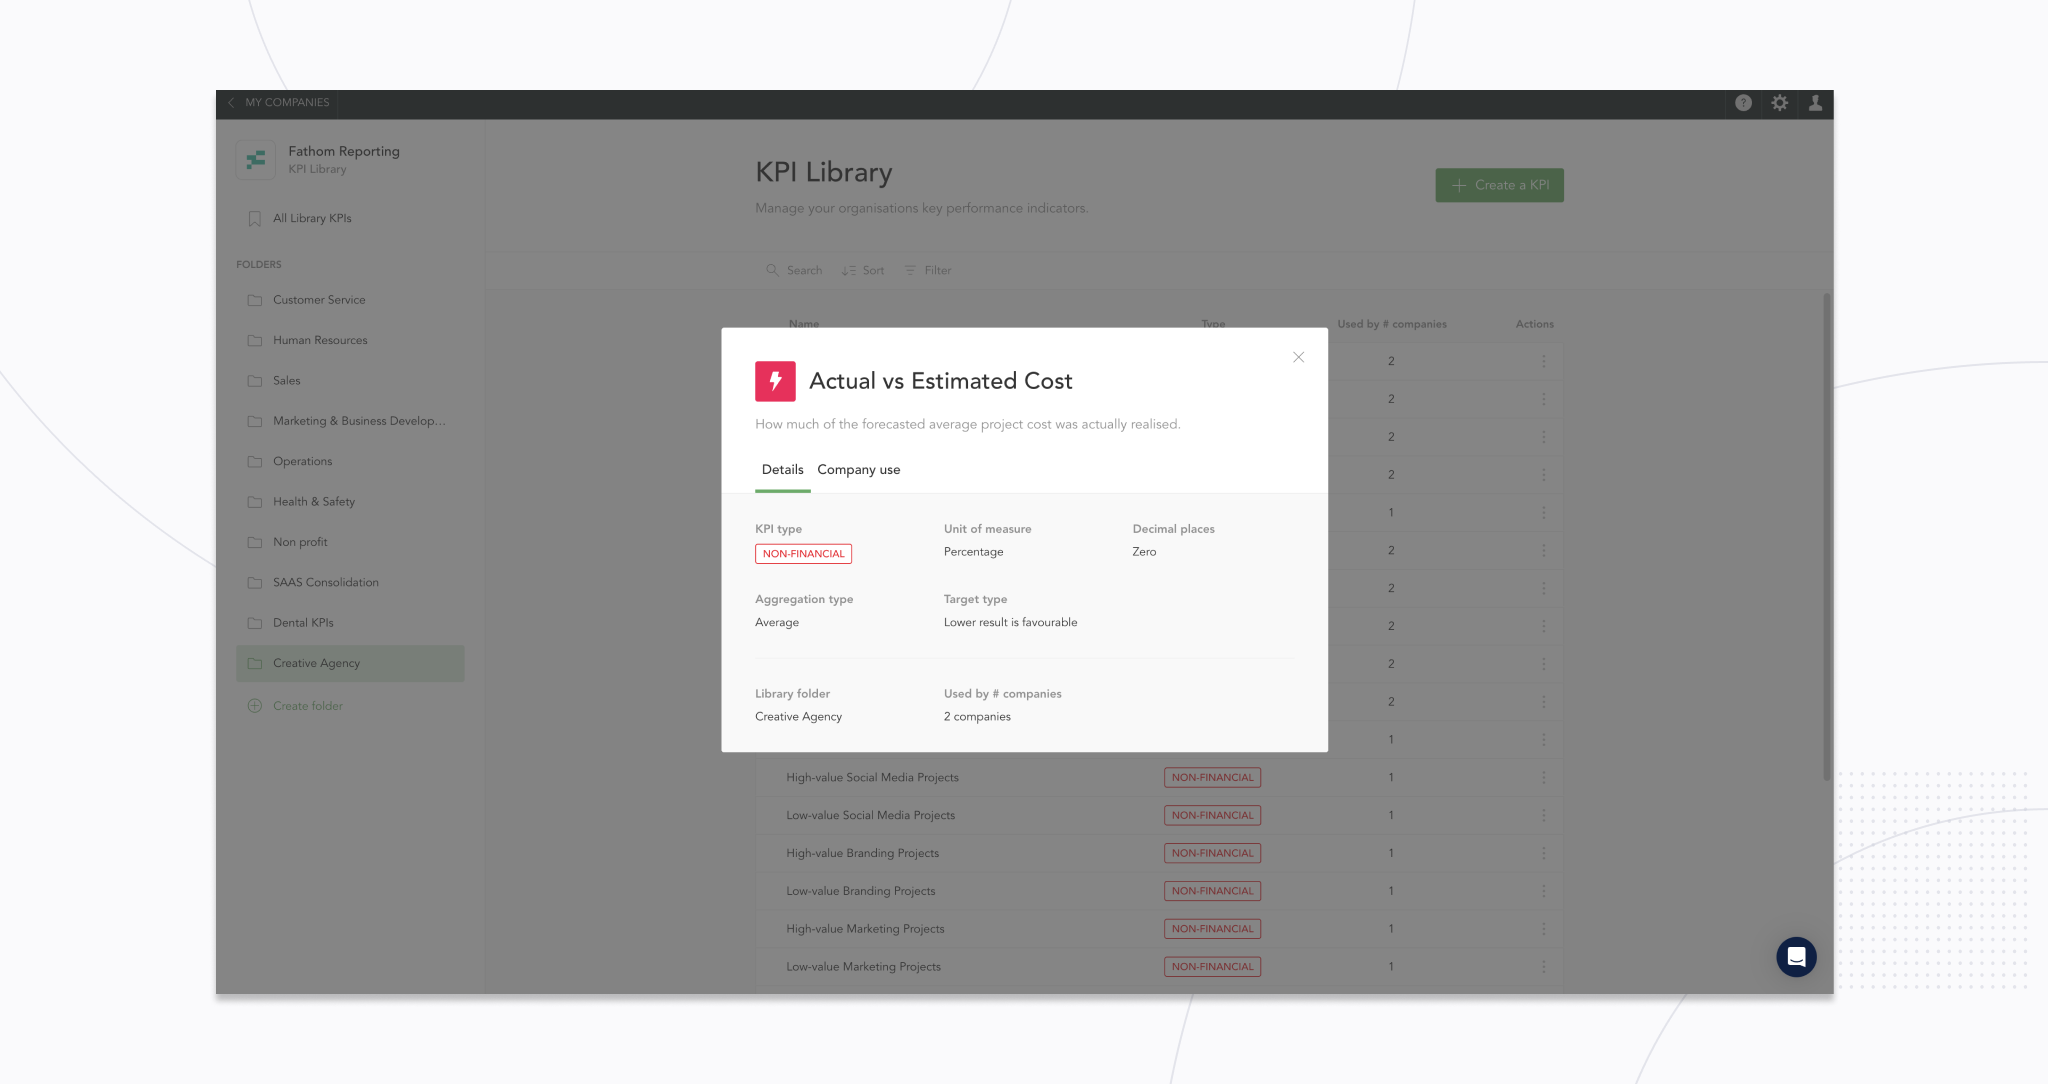 KPI Library – View Details